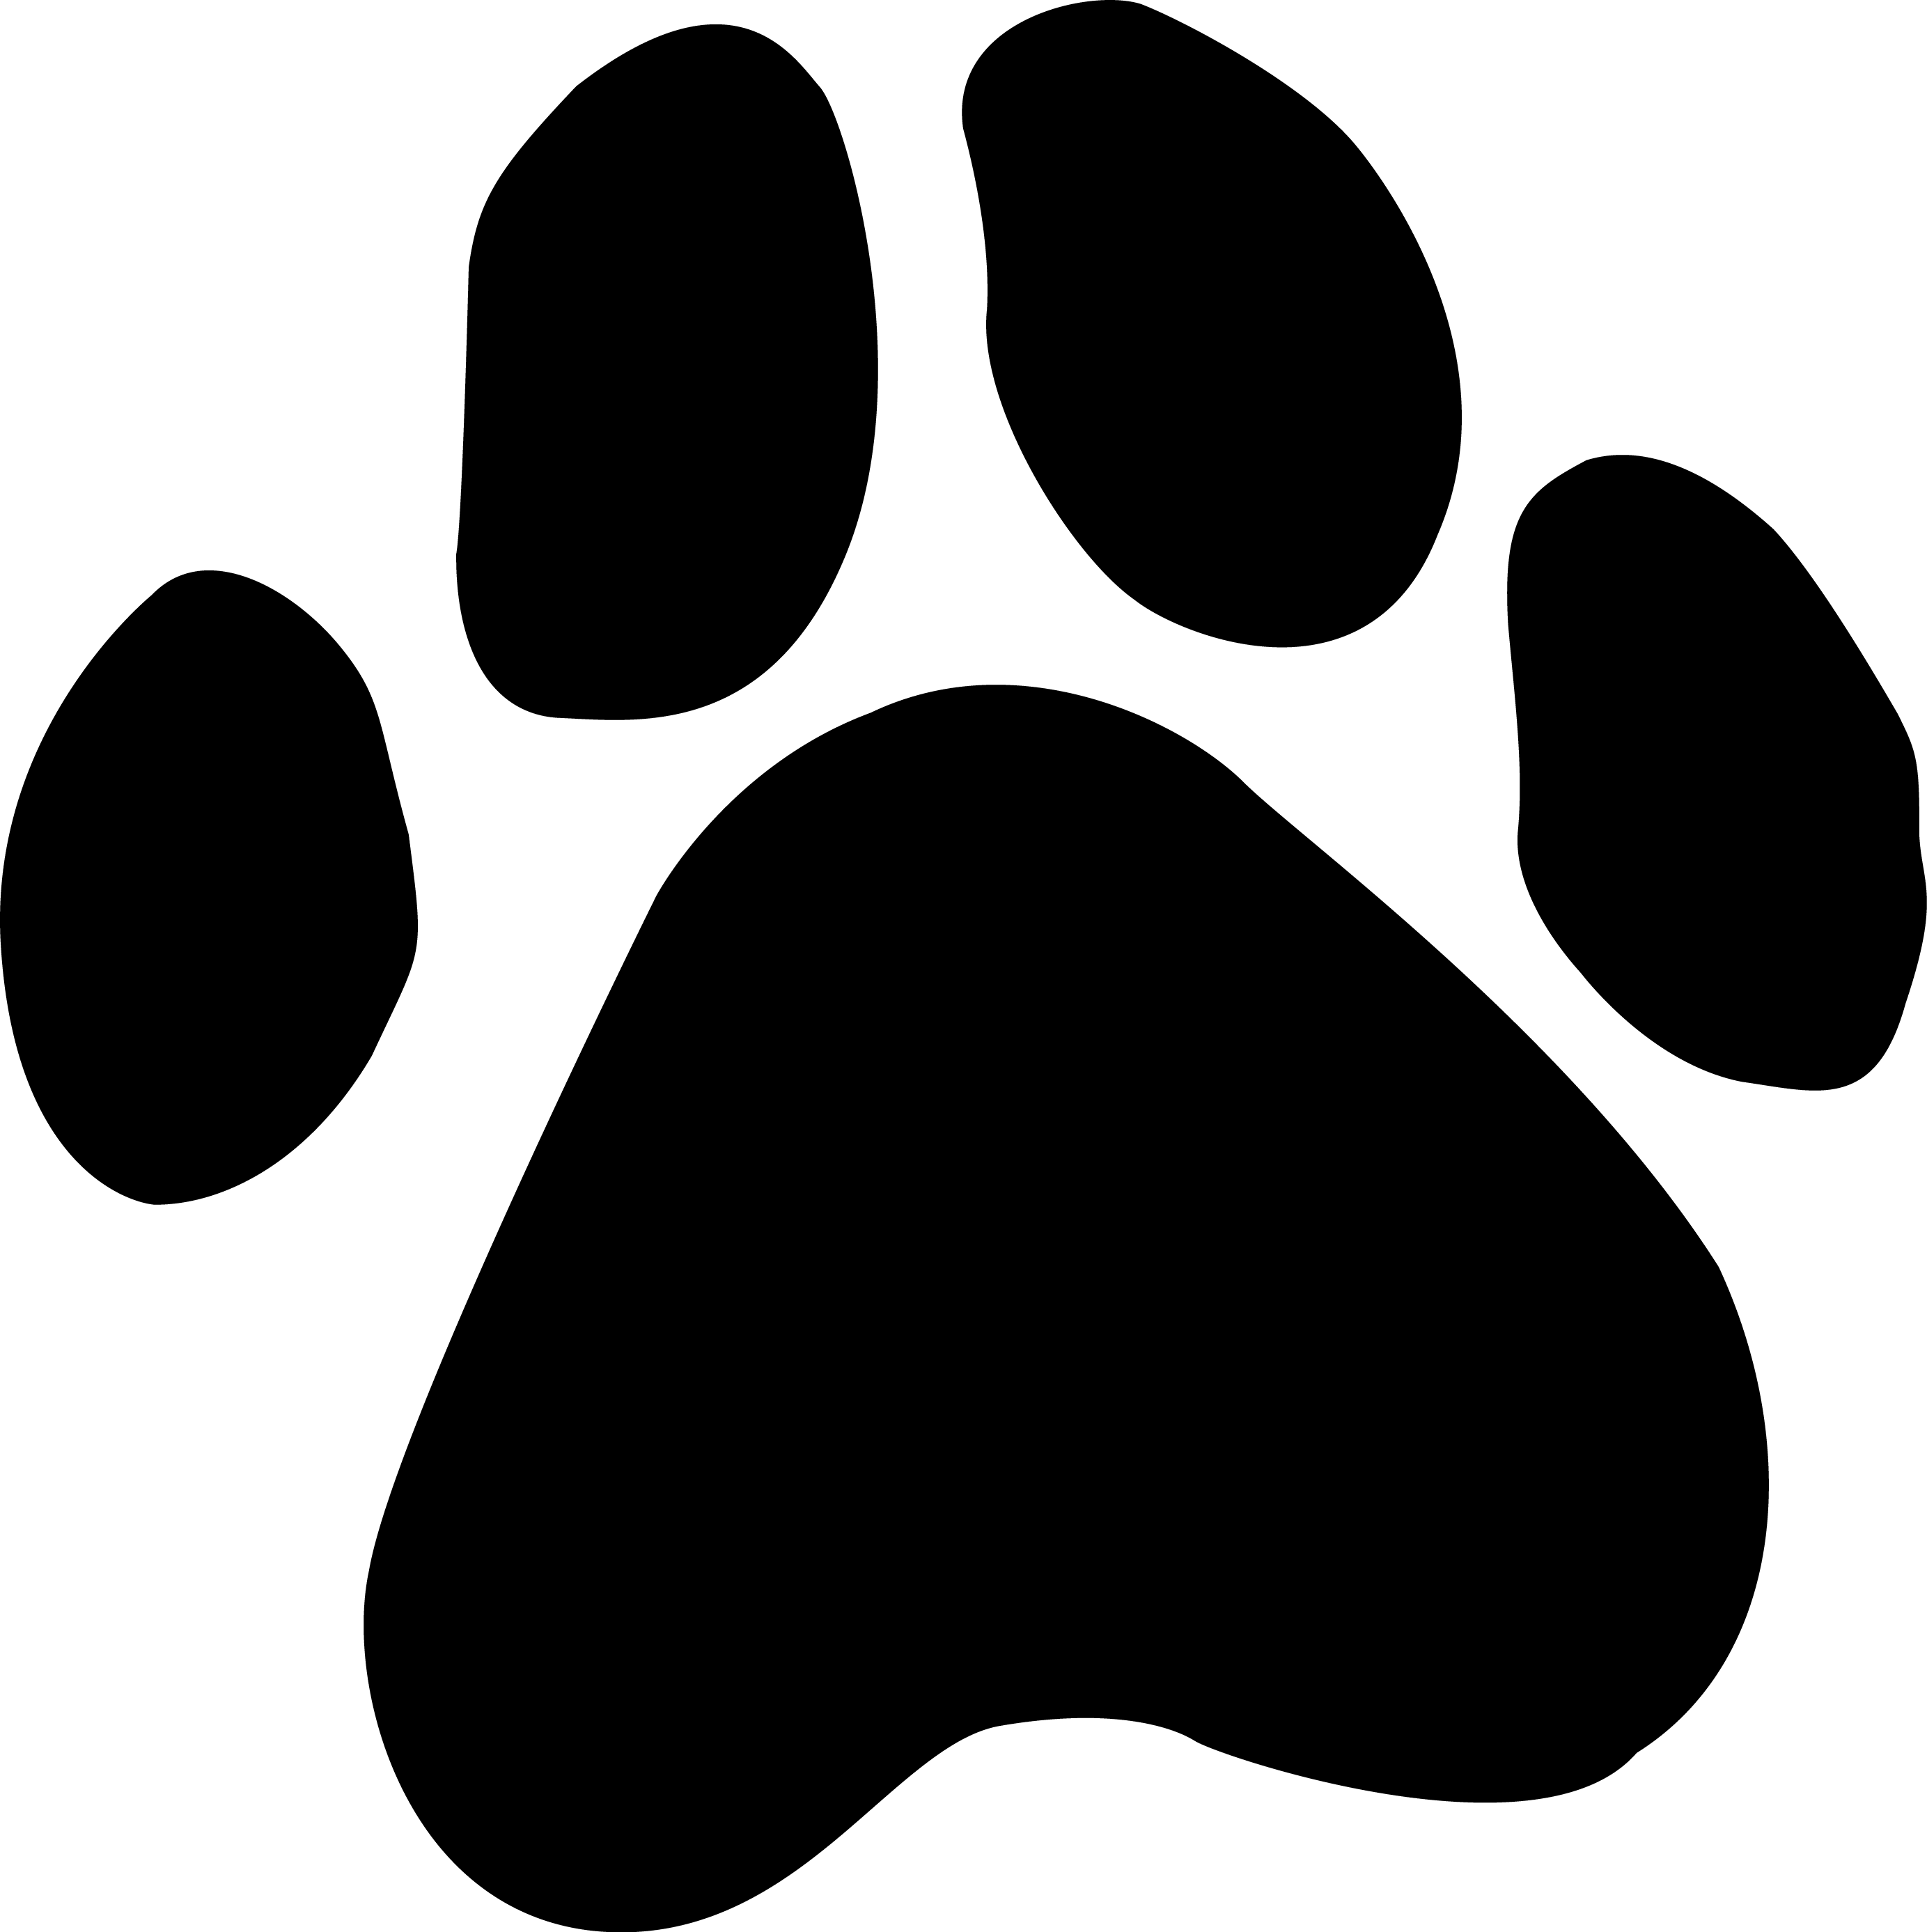 pawprint clipart jack russell terrier